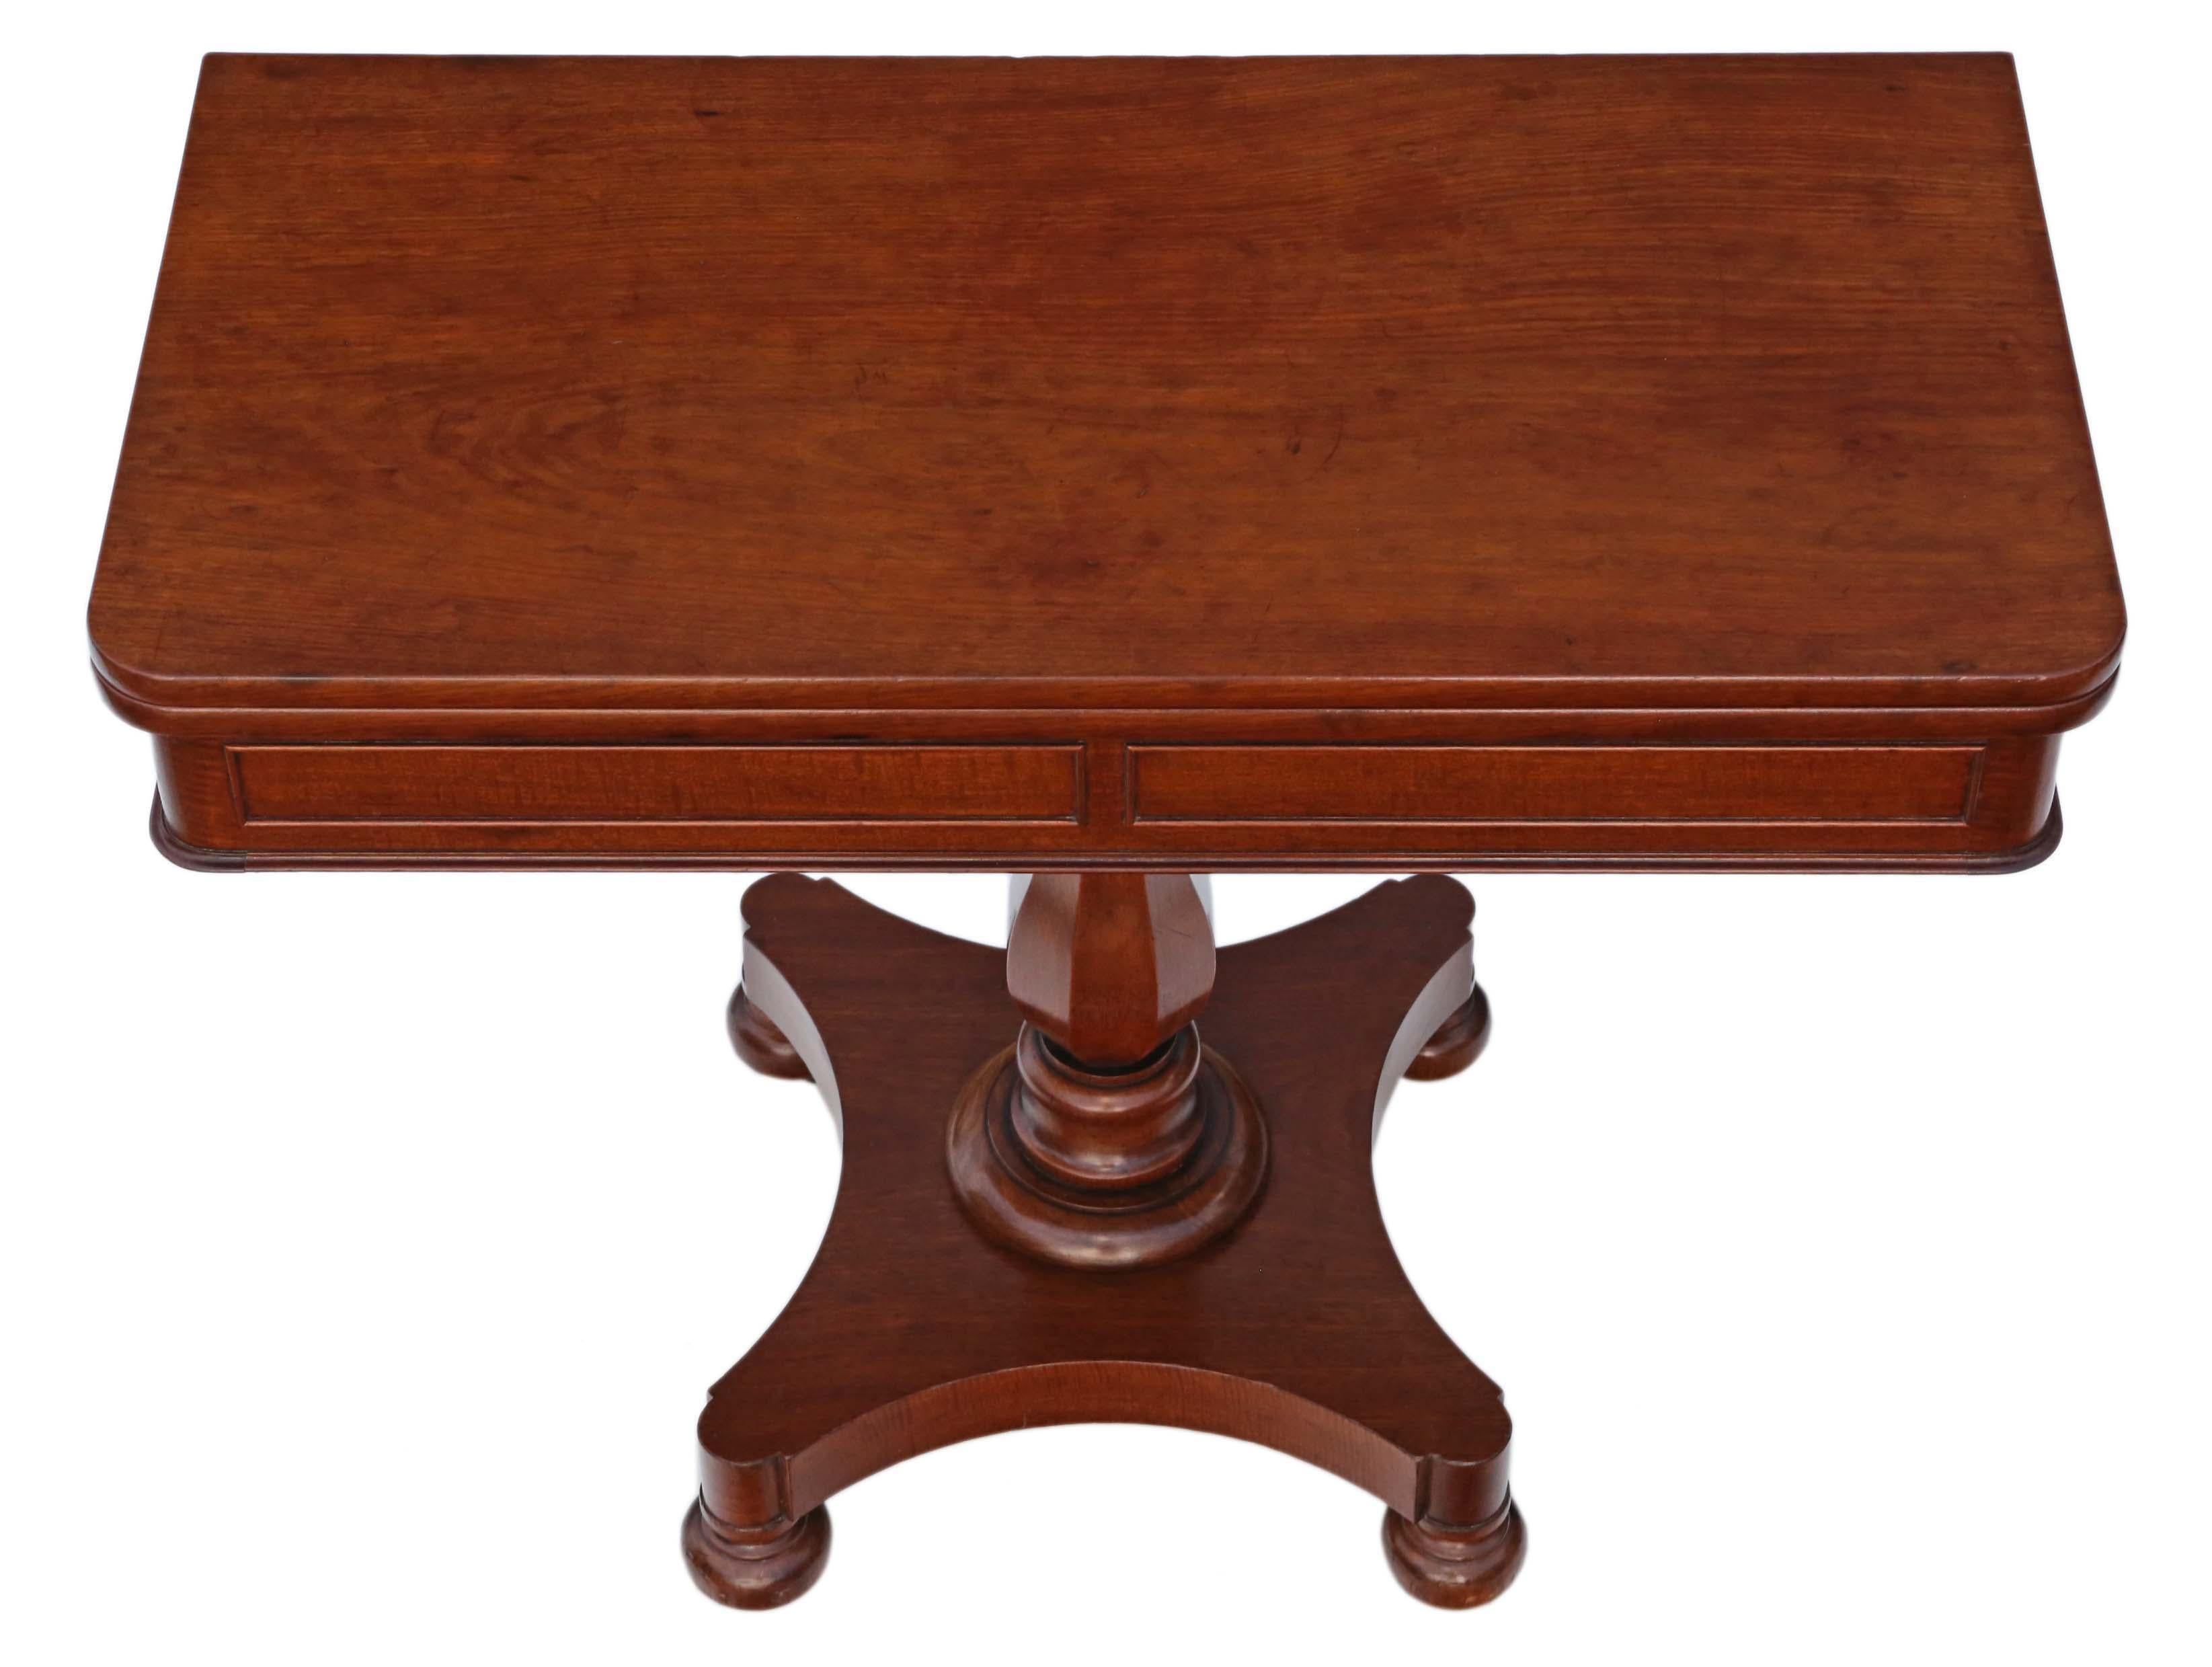 Victorian quality mahogany folding tea table, circa 1850, that would also make a charming card or console table.
This is a lovely table, that is full of age, charm and character. Stands on concealed castors.
No loose joints and the finishes are in